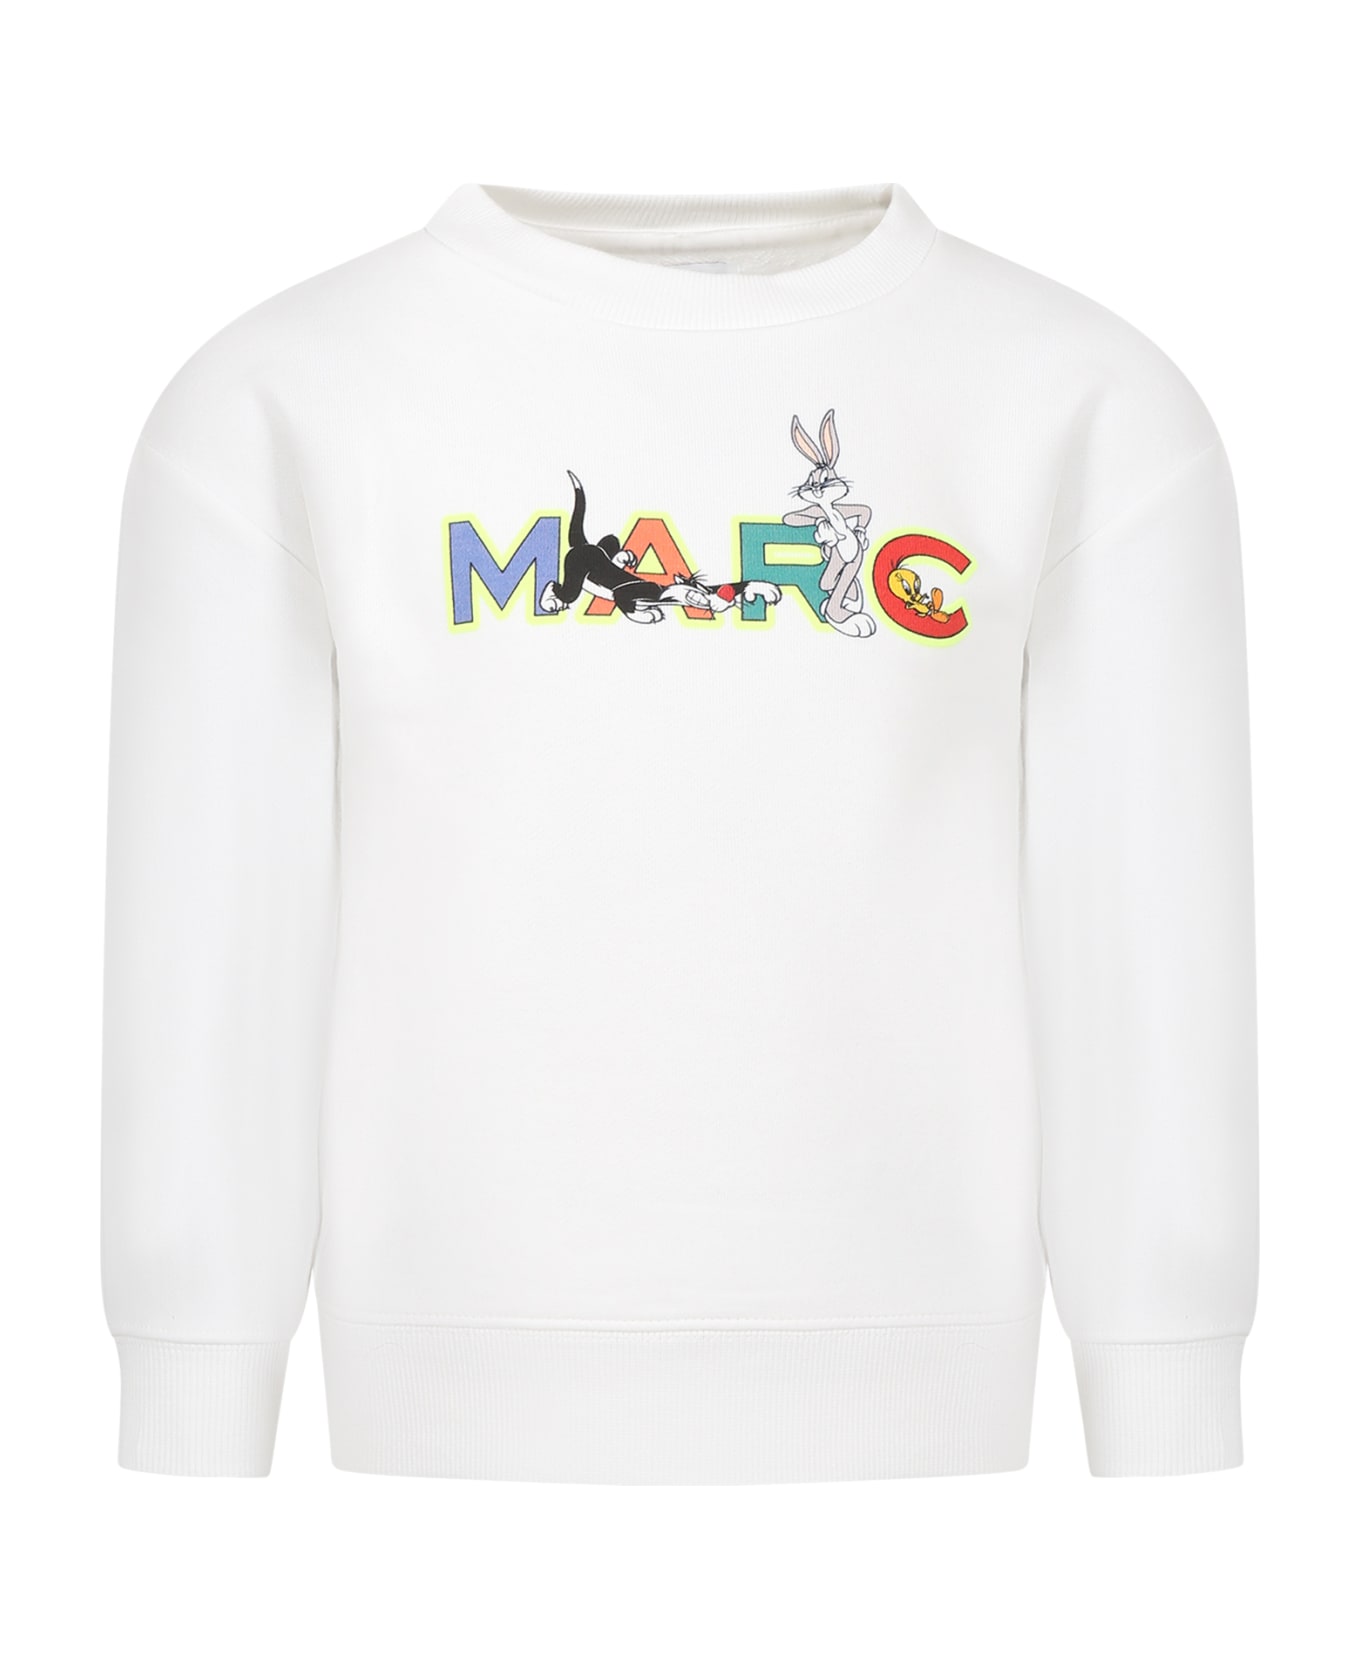 Marc Jacobs White Sweatshirt For Boy With Print And Logo - White